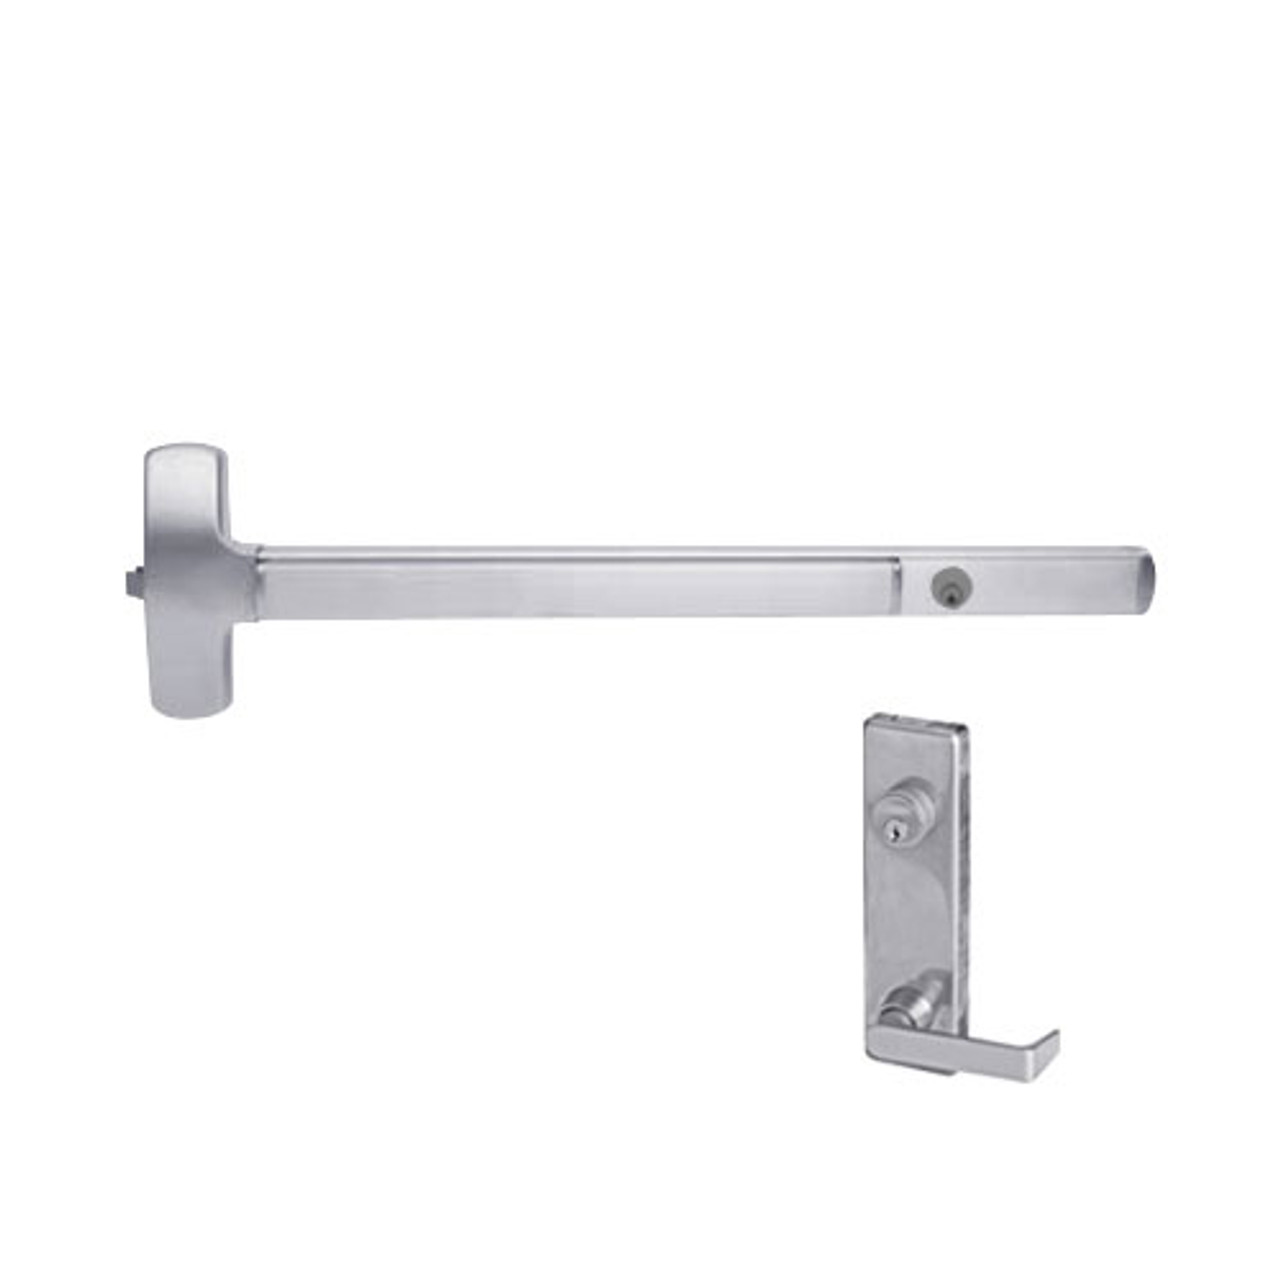 CD25-R-L-DANE-US32-4-RHR Falcon Exit Device in Polished Stainless Steel